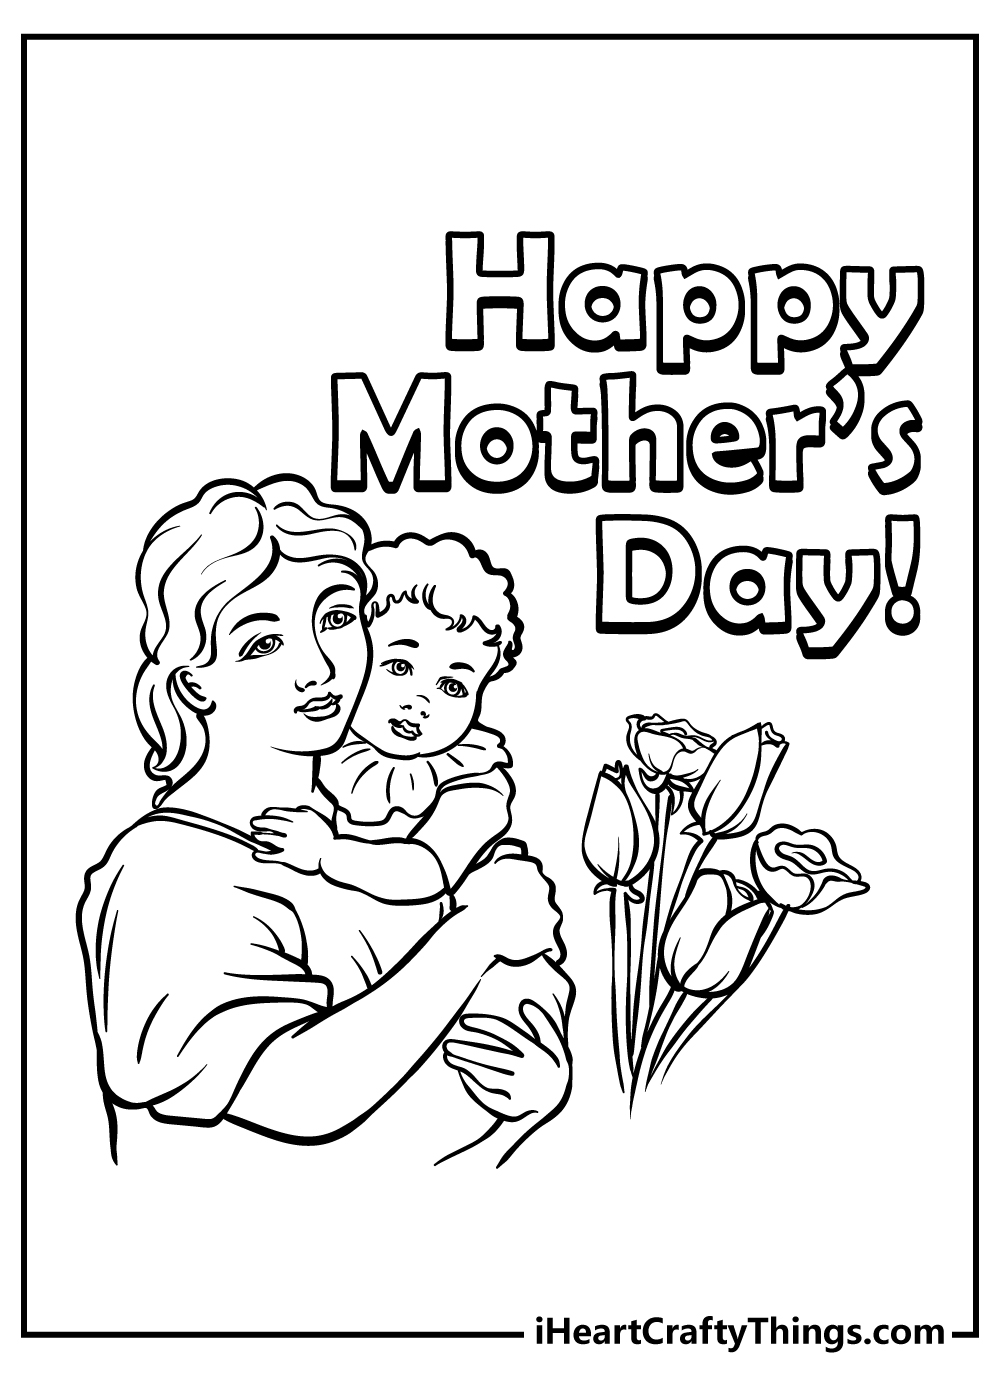 hand drawing cartoon concept happy mother's day by atthameeni Vectors &  Illustrations Free download - Yayimages